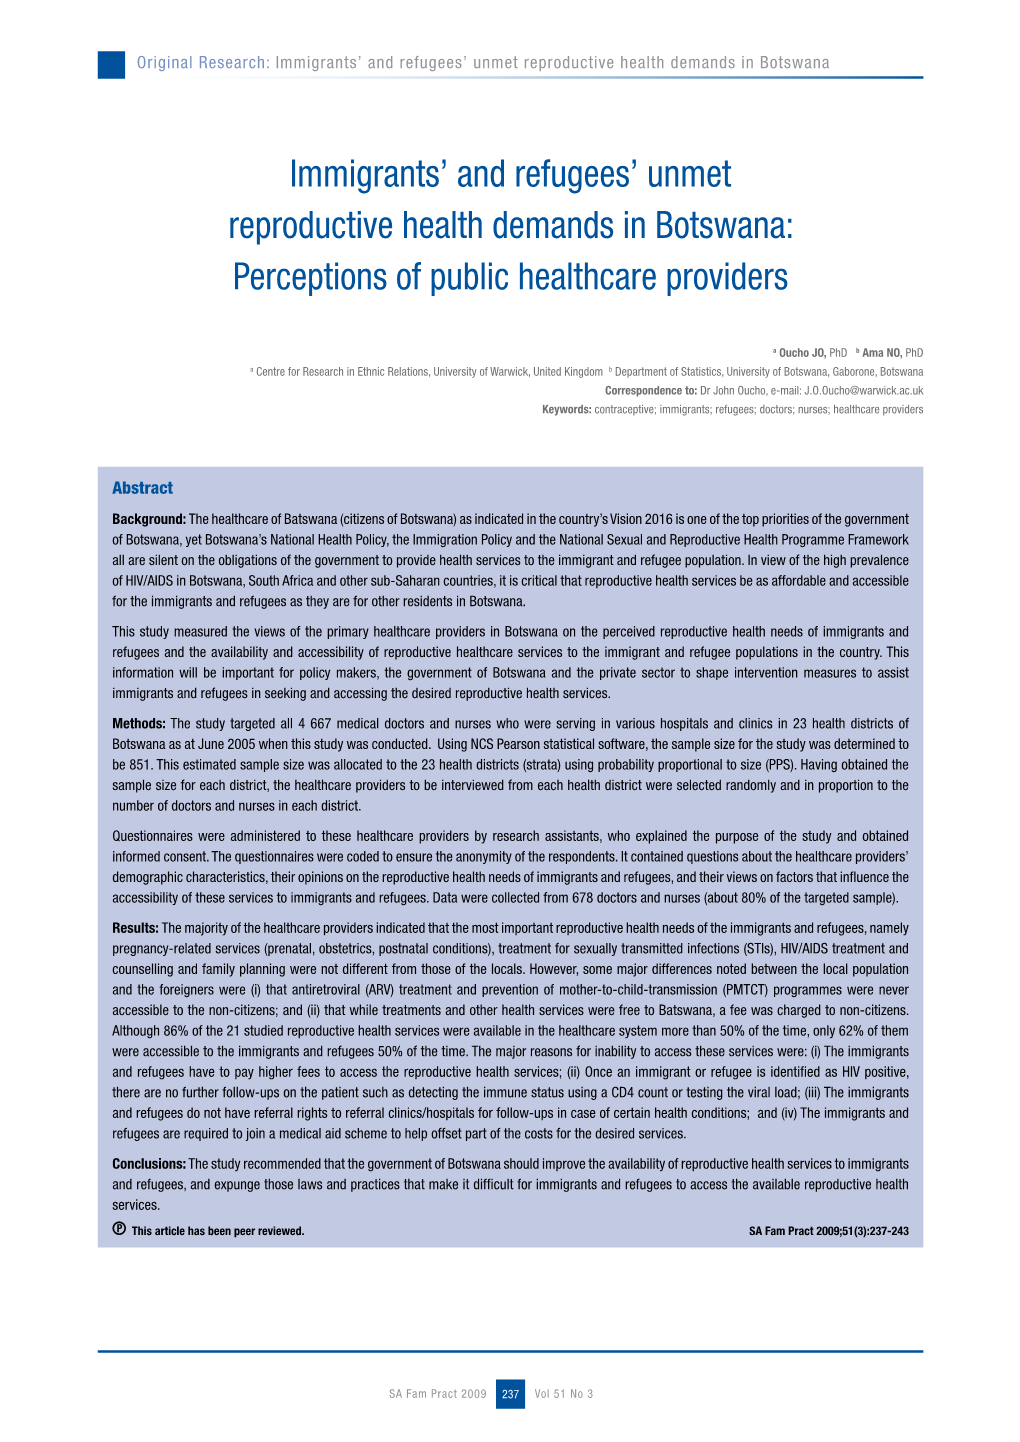 Immigrants' and Refugees' Unmet Reproductive Health Demands in Botswana: Perceptions of Public Healthcare Providers